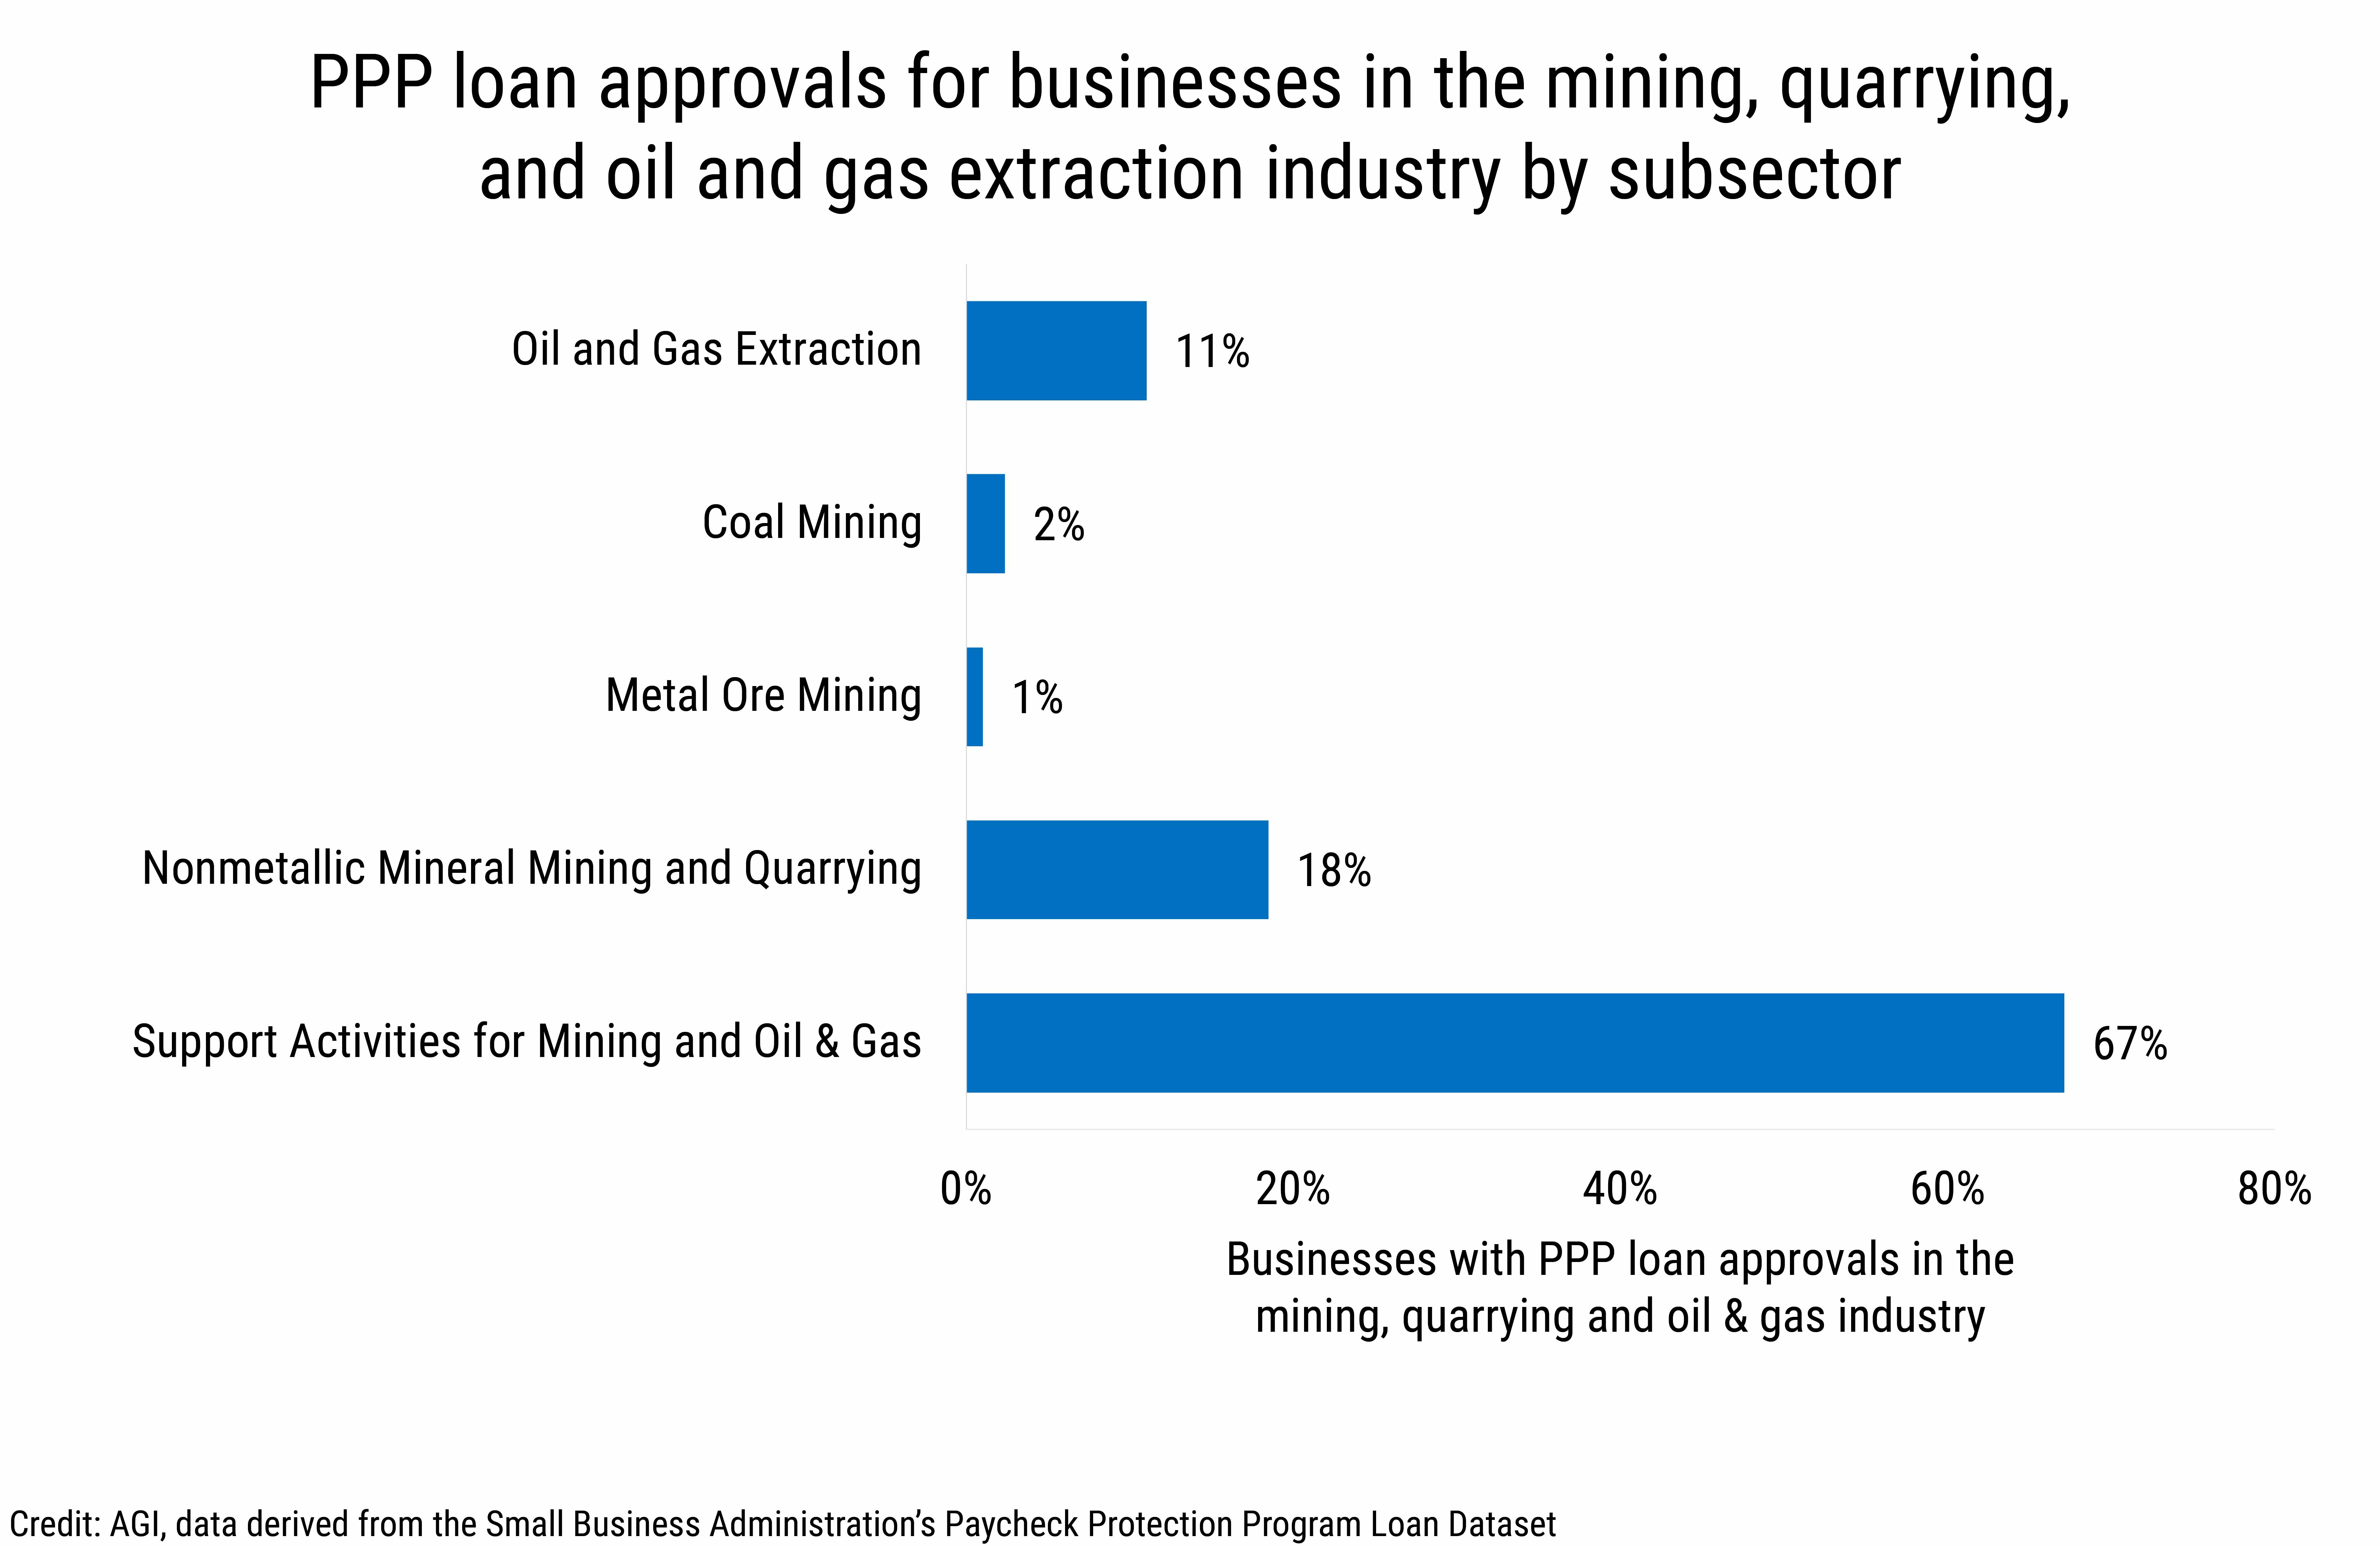 DB_2020-016 chart 01: PPP loan approvals for businesses in the mining, quarrying, and oil and gas extraction industry by subsector. (credit: AGI, data derived from the Small Business Administration&#039;s Paycheck Protection Program Loan Dataset)